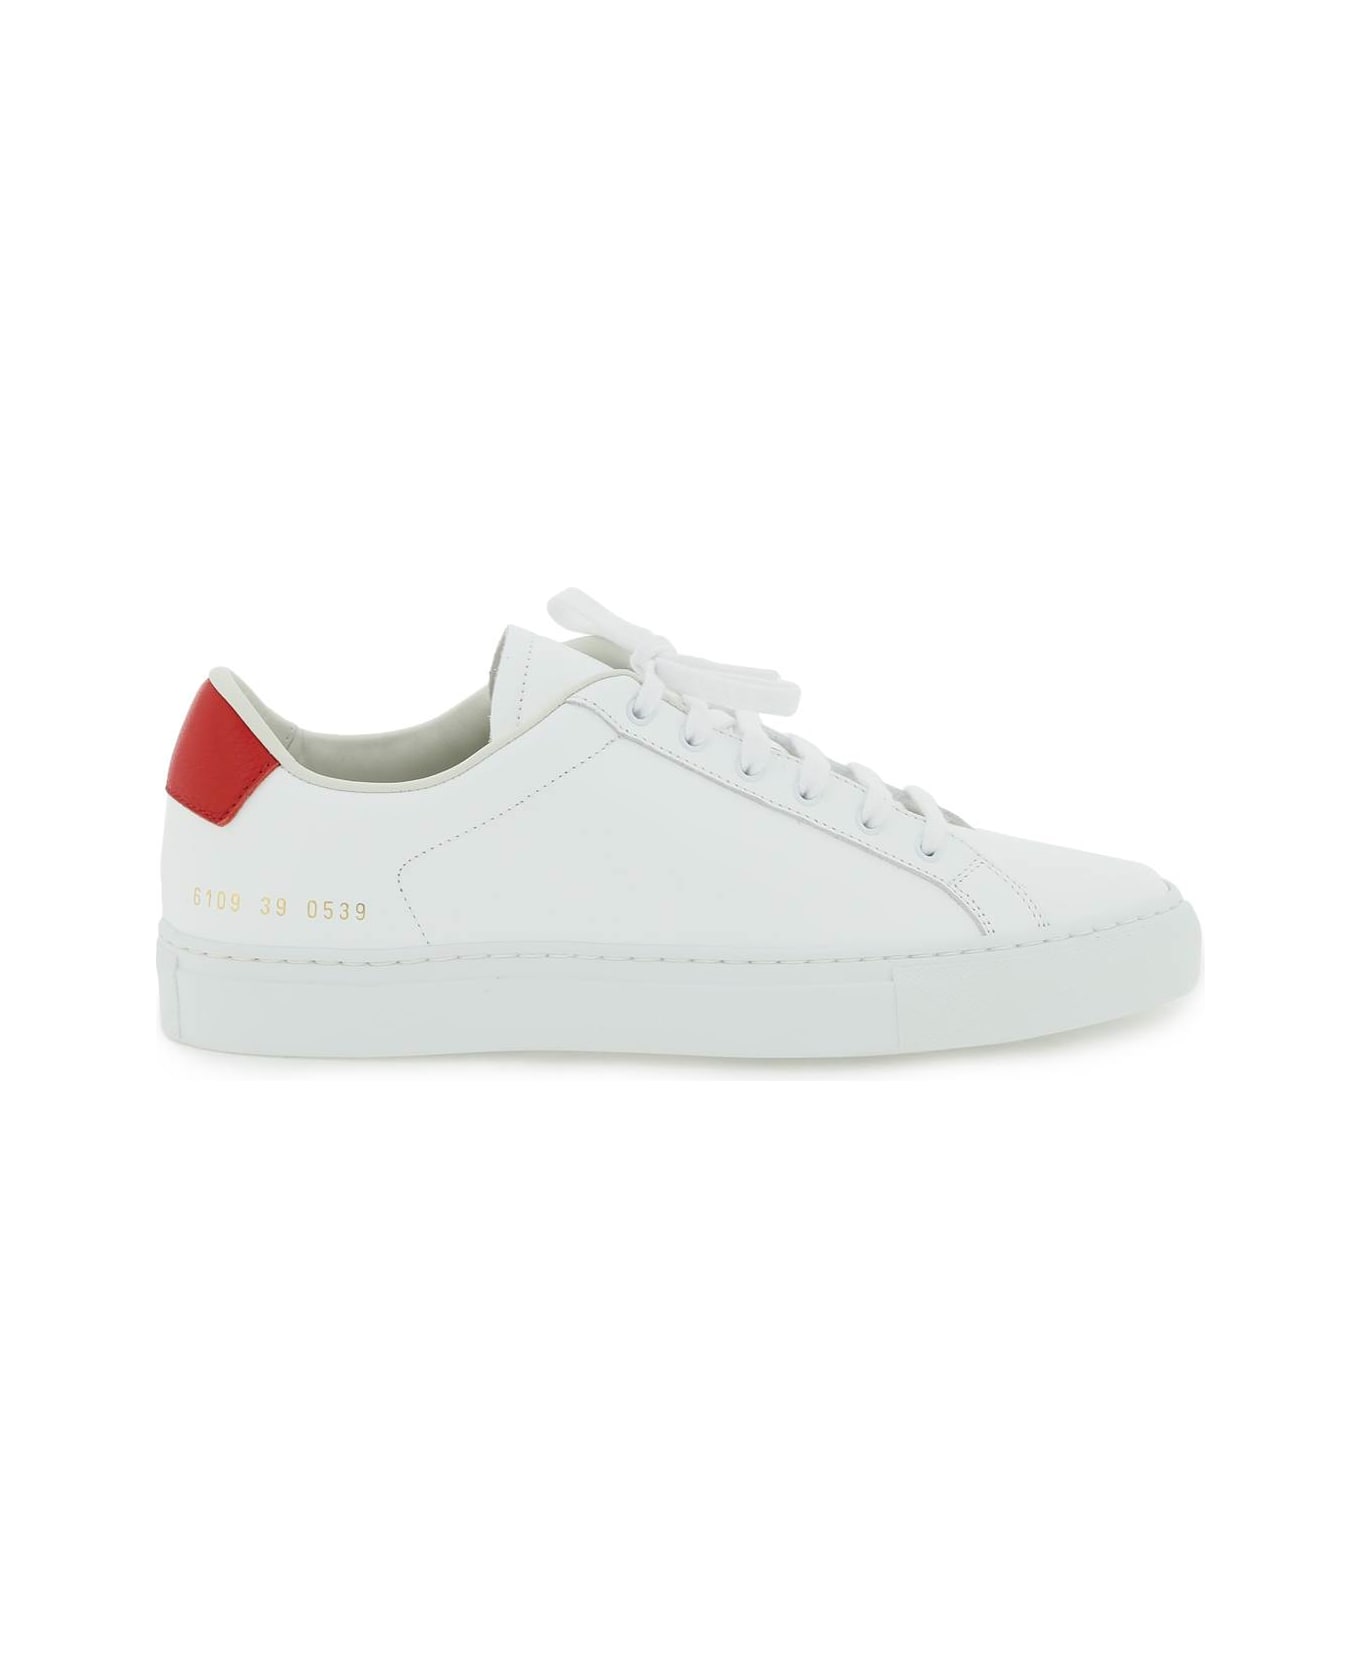 Common Projects Retro Low Sneaker - White